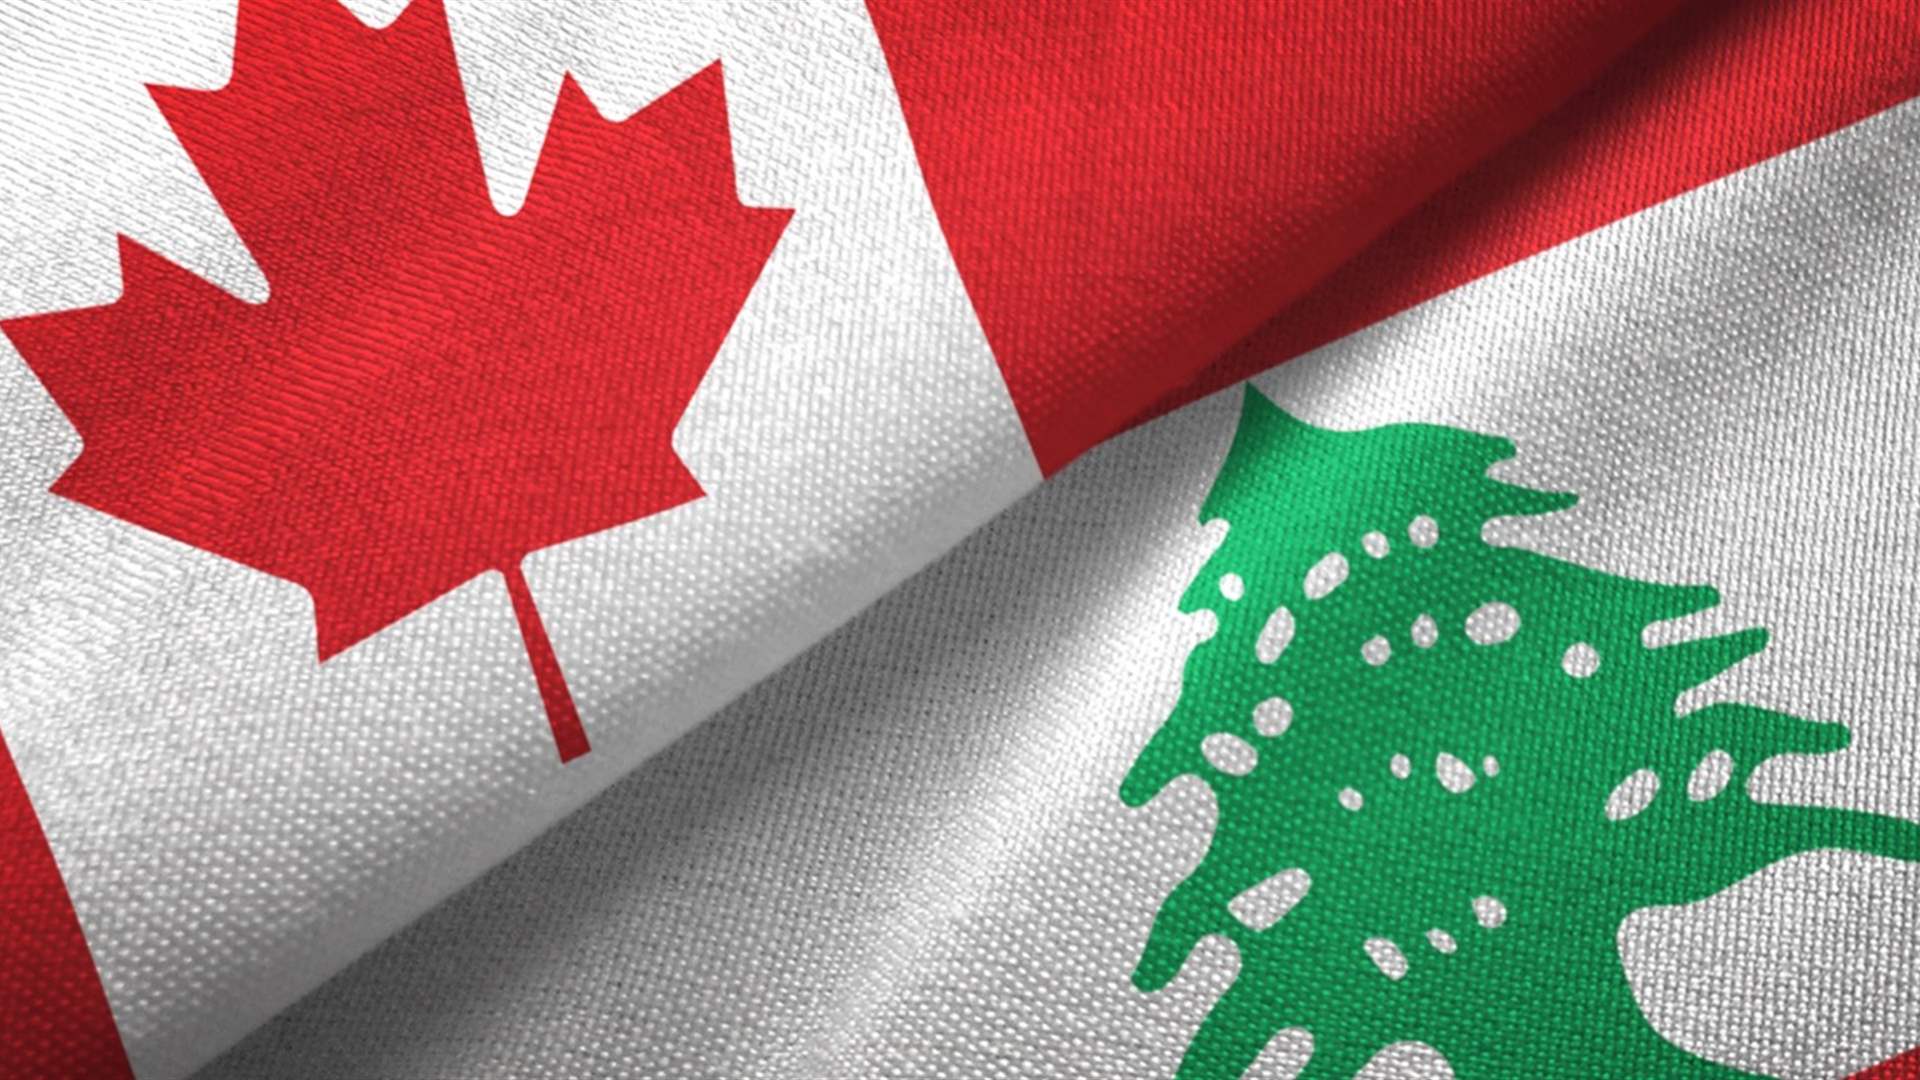 Canada advises against travel to Lebanon, citing deteriorating security situation